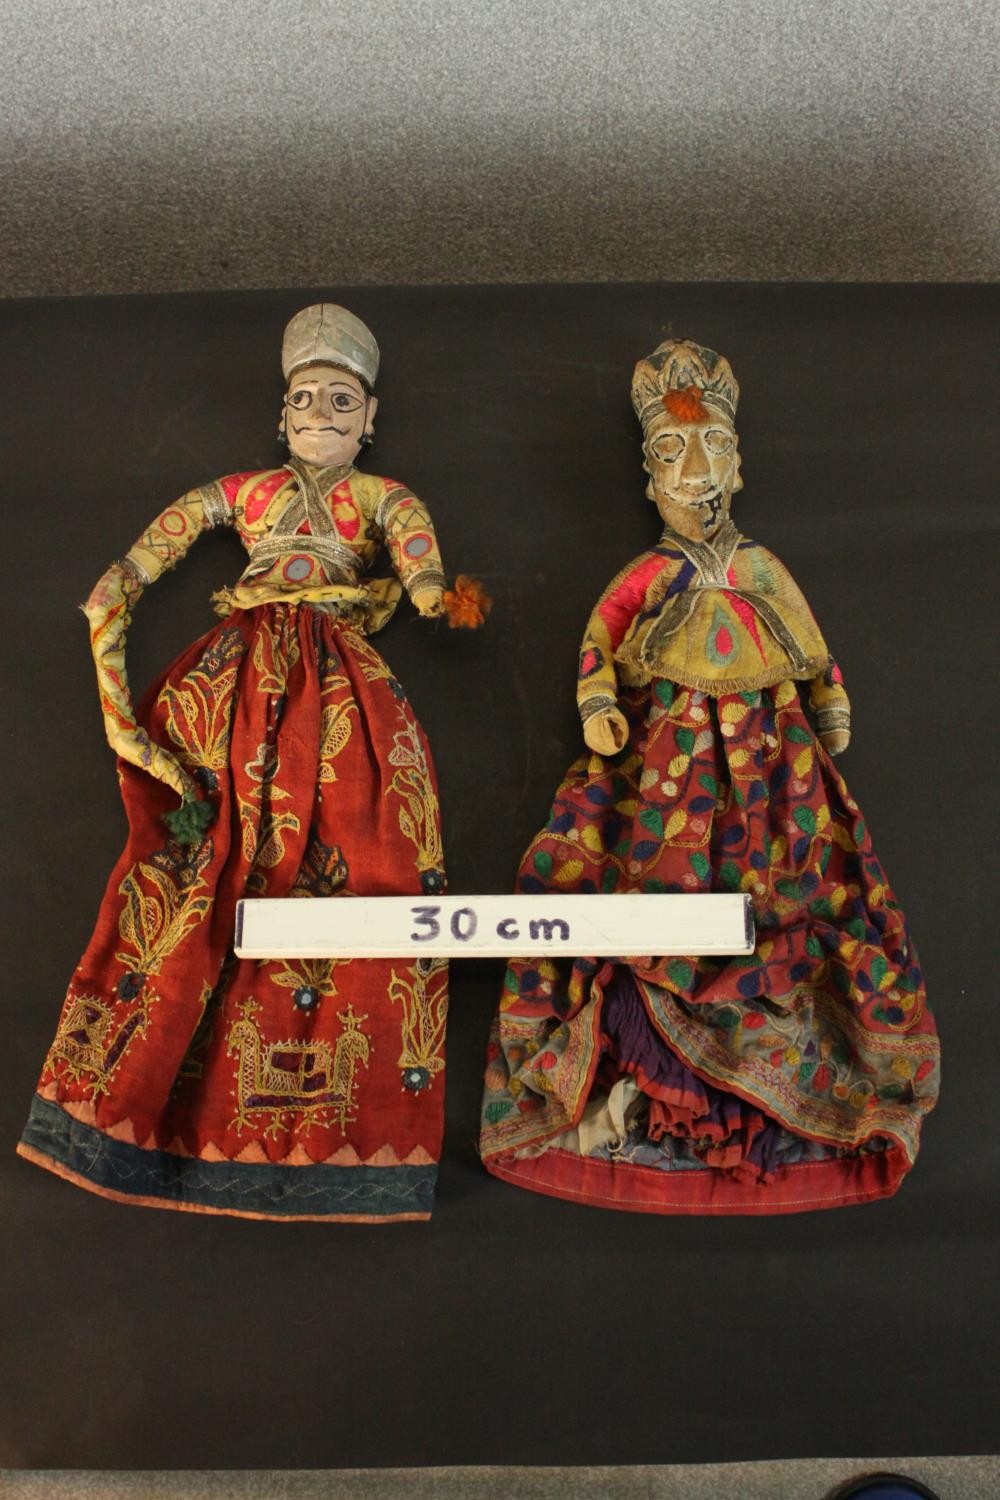 Two 19th century carved and painted Indian dolls in embroidered traditional costumes, the robes with - Image 2 of 12